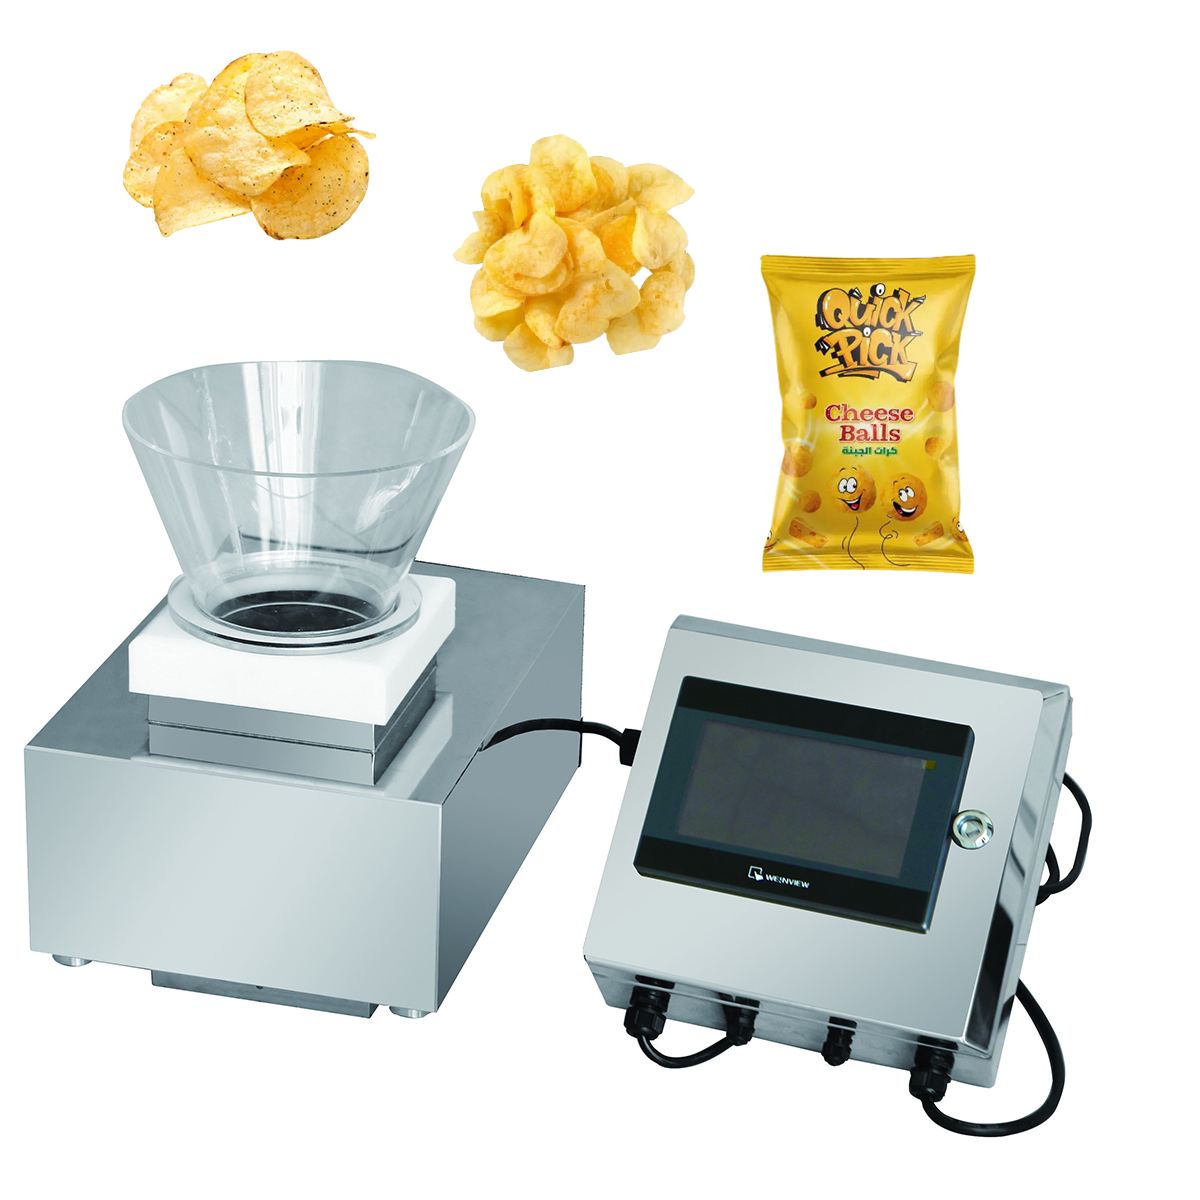 Fully automatic packaging front drop type metal detector for potato chips